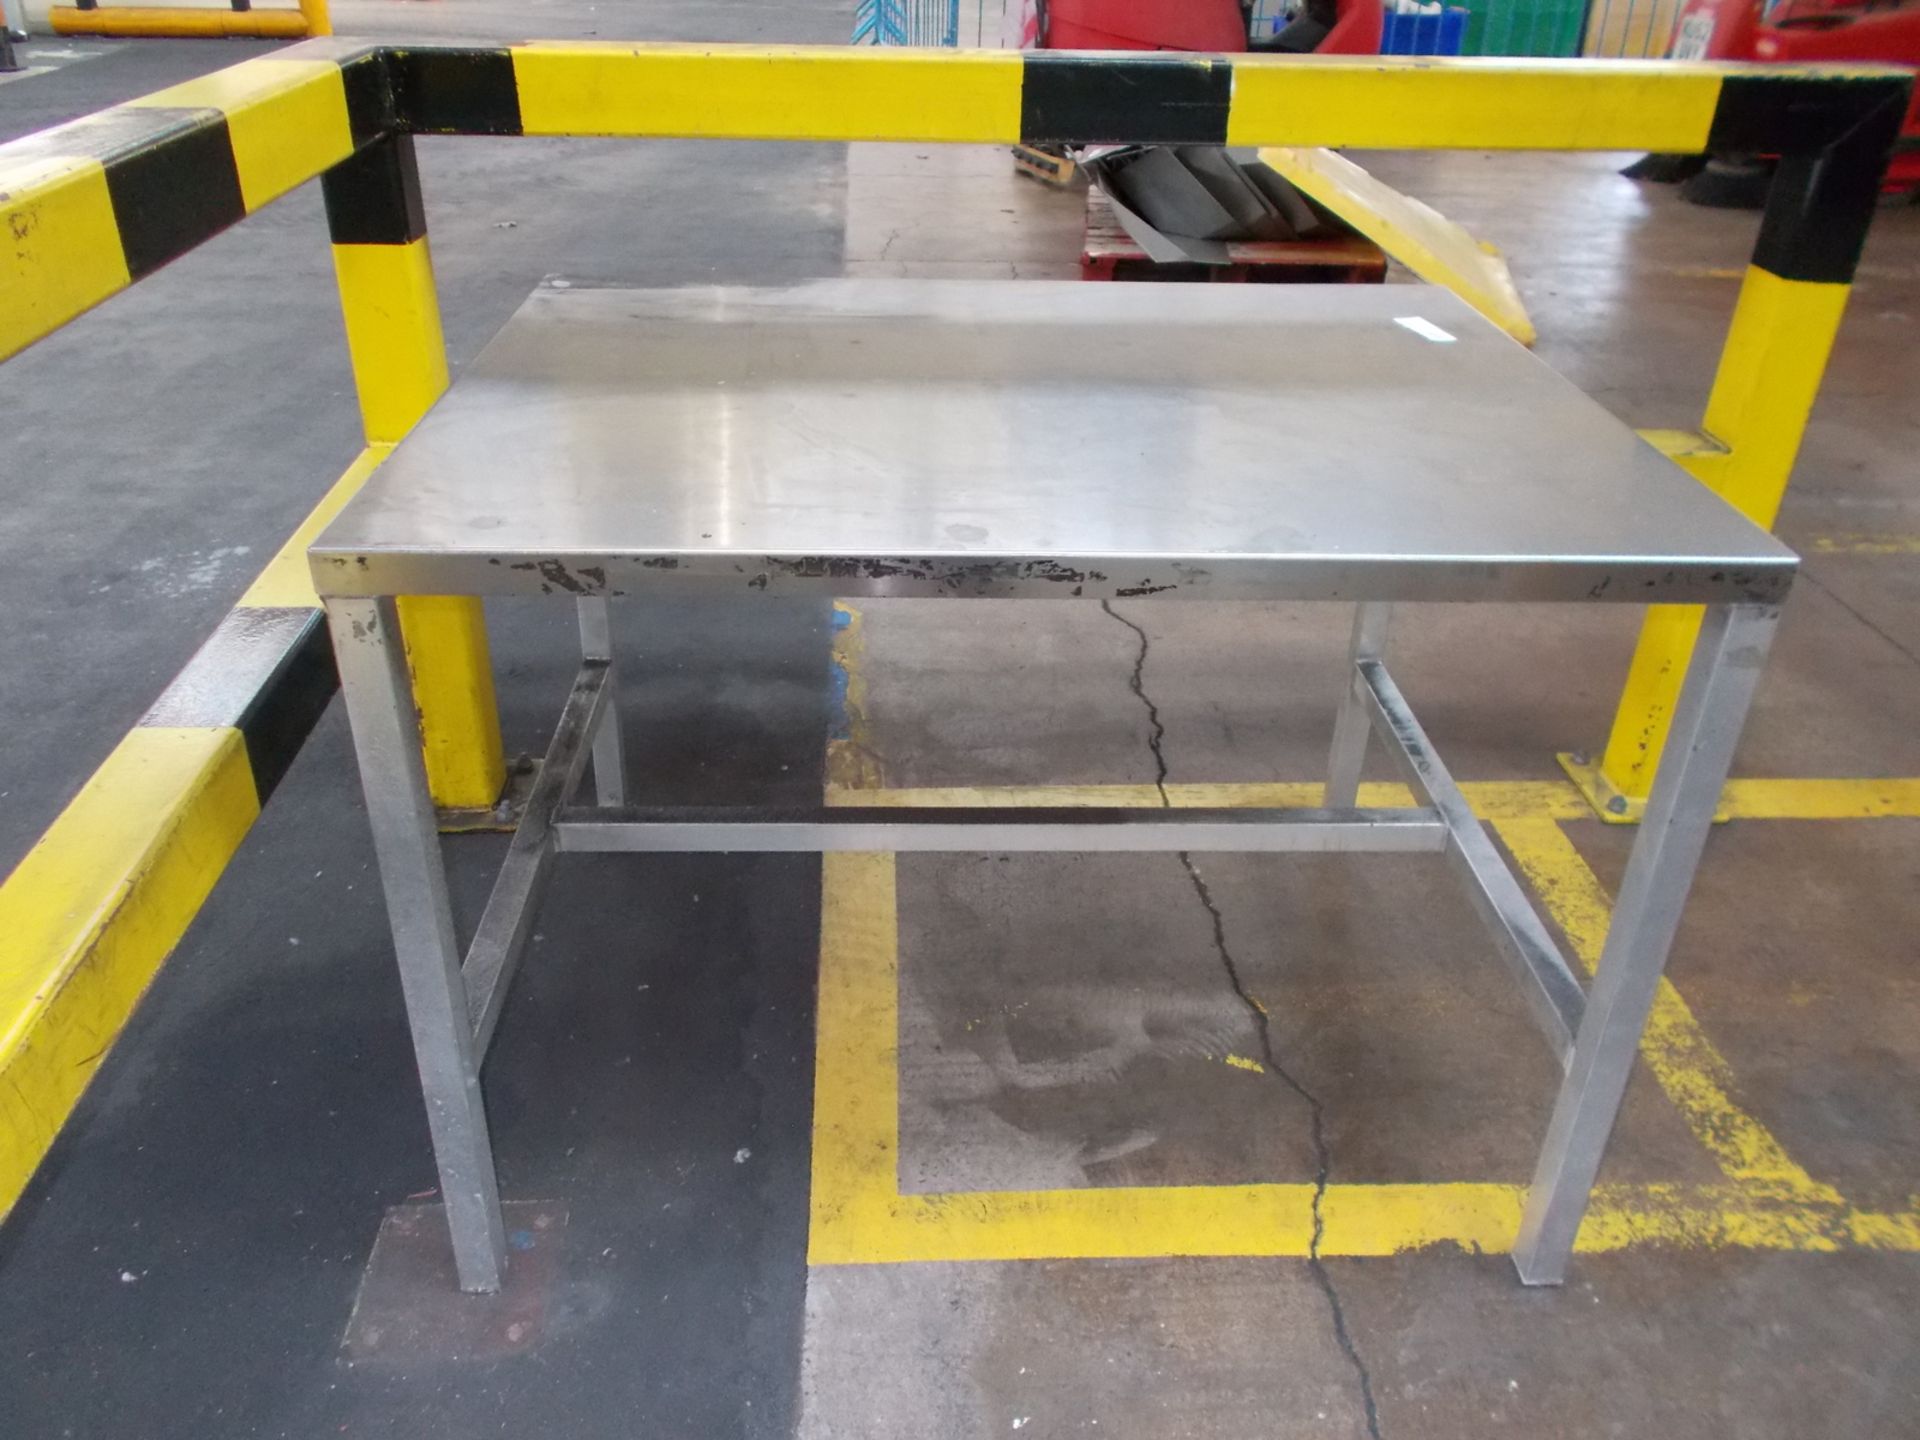 Stainless Steel topped worktable